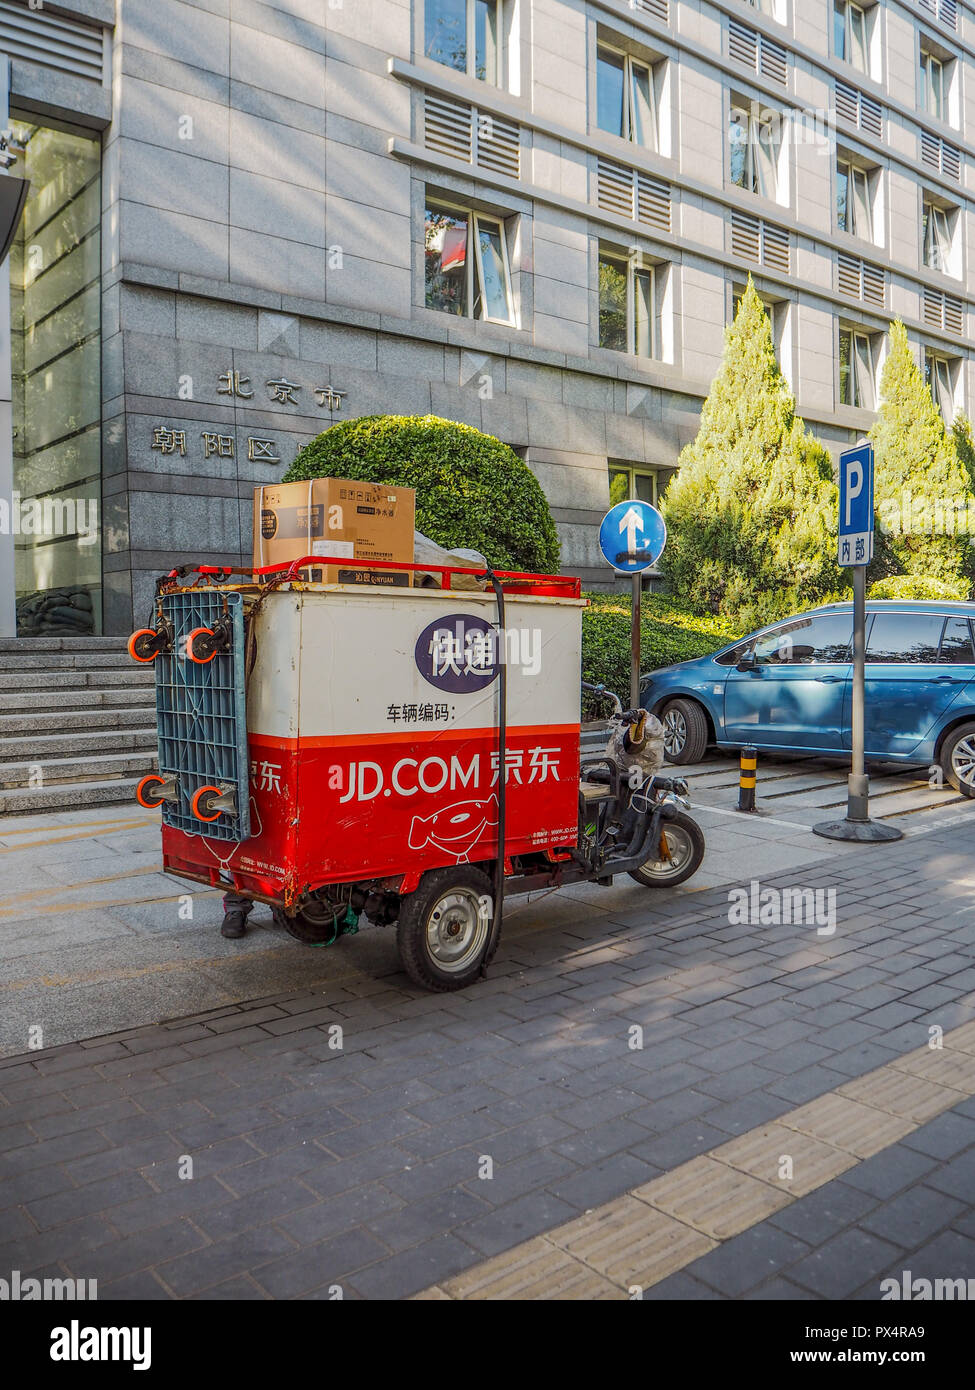 August 2018- Beijing, China: Small parvel delivery cart from one of China's largest e-commerce companies, JD.COM Stock Photo